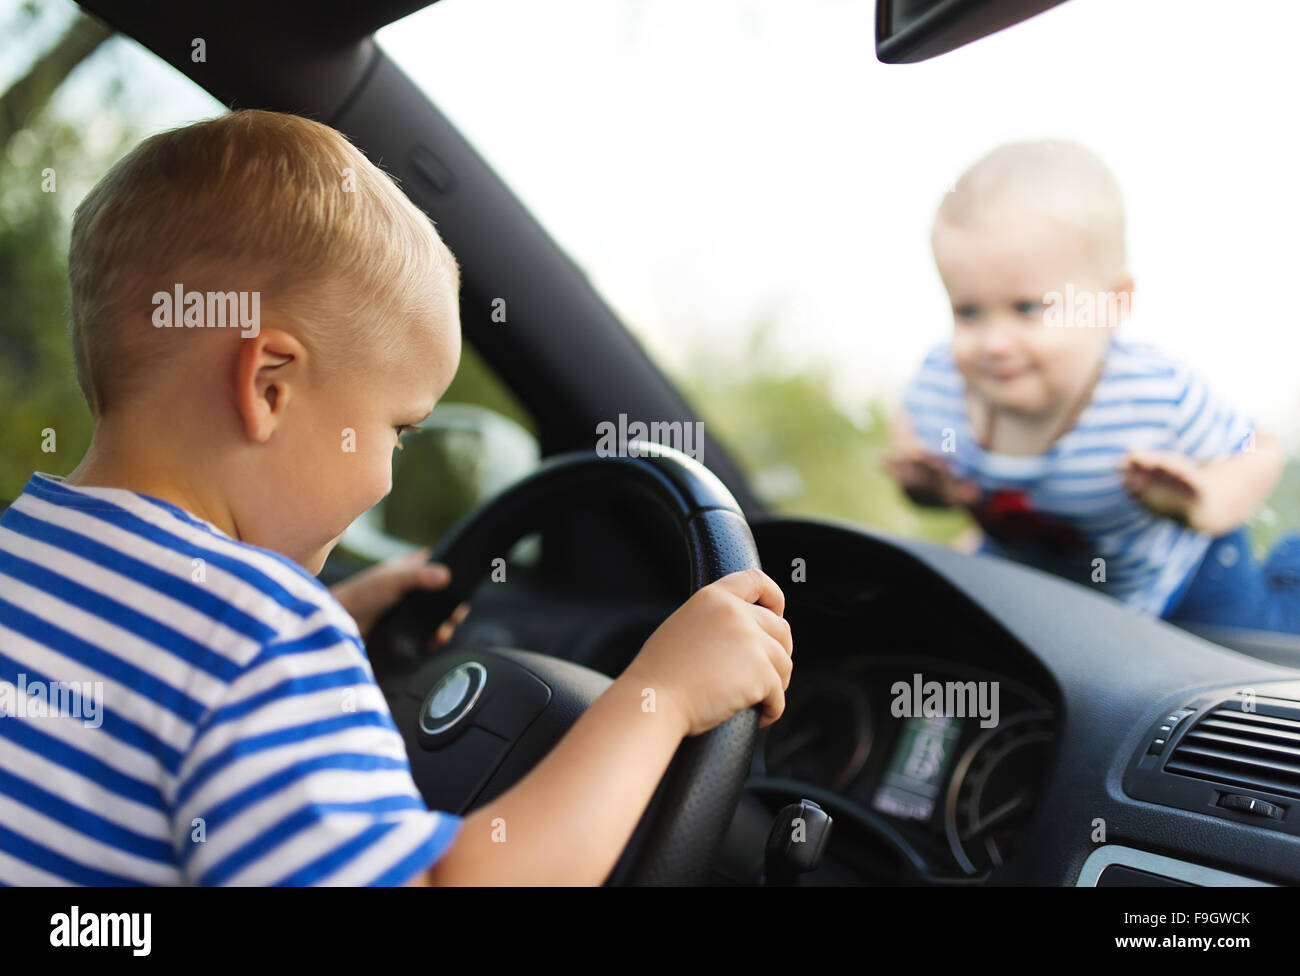 Little boy playing with a steering wheel in a car Stock Photo